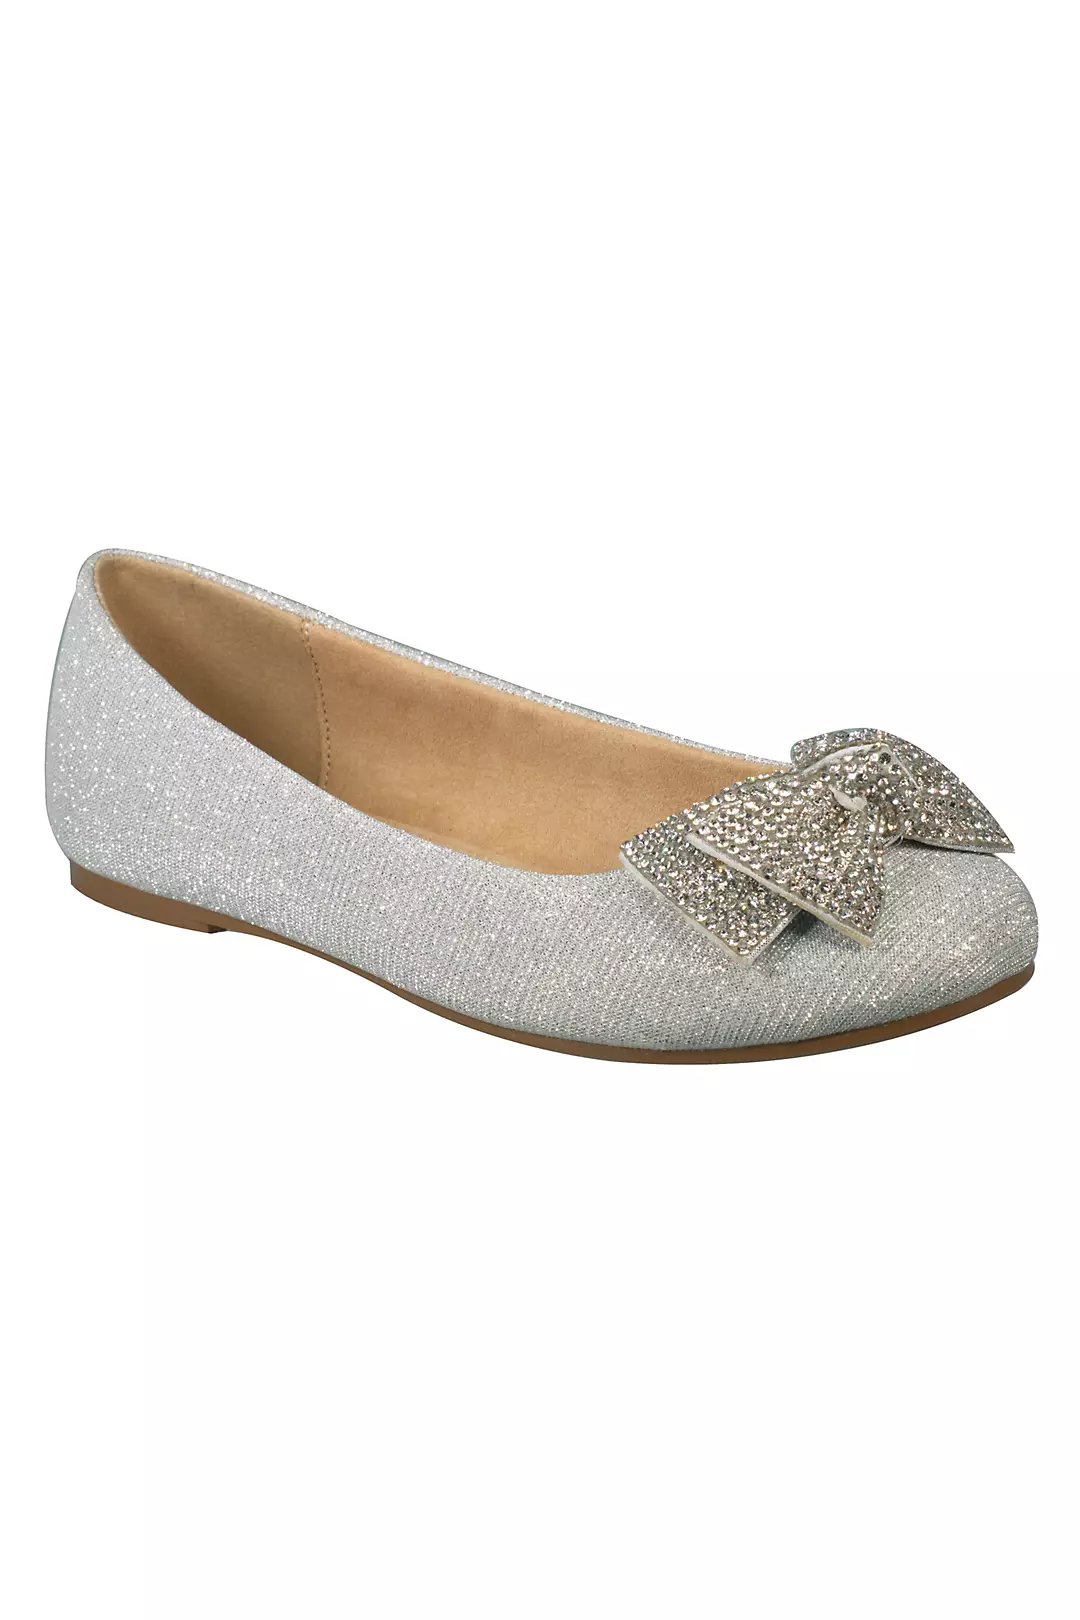 Girls Glitter Ballet Flats with Crystal Bow Image